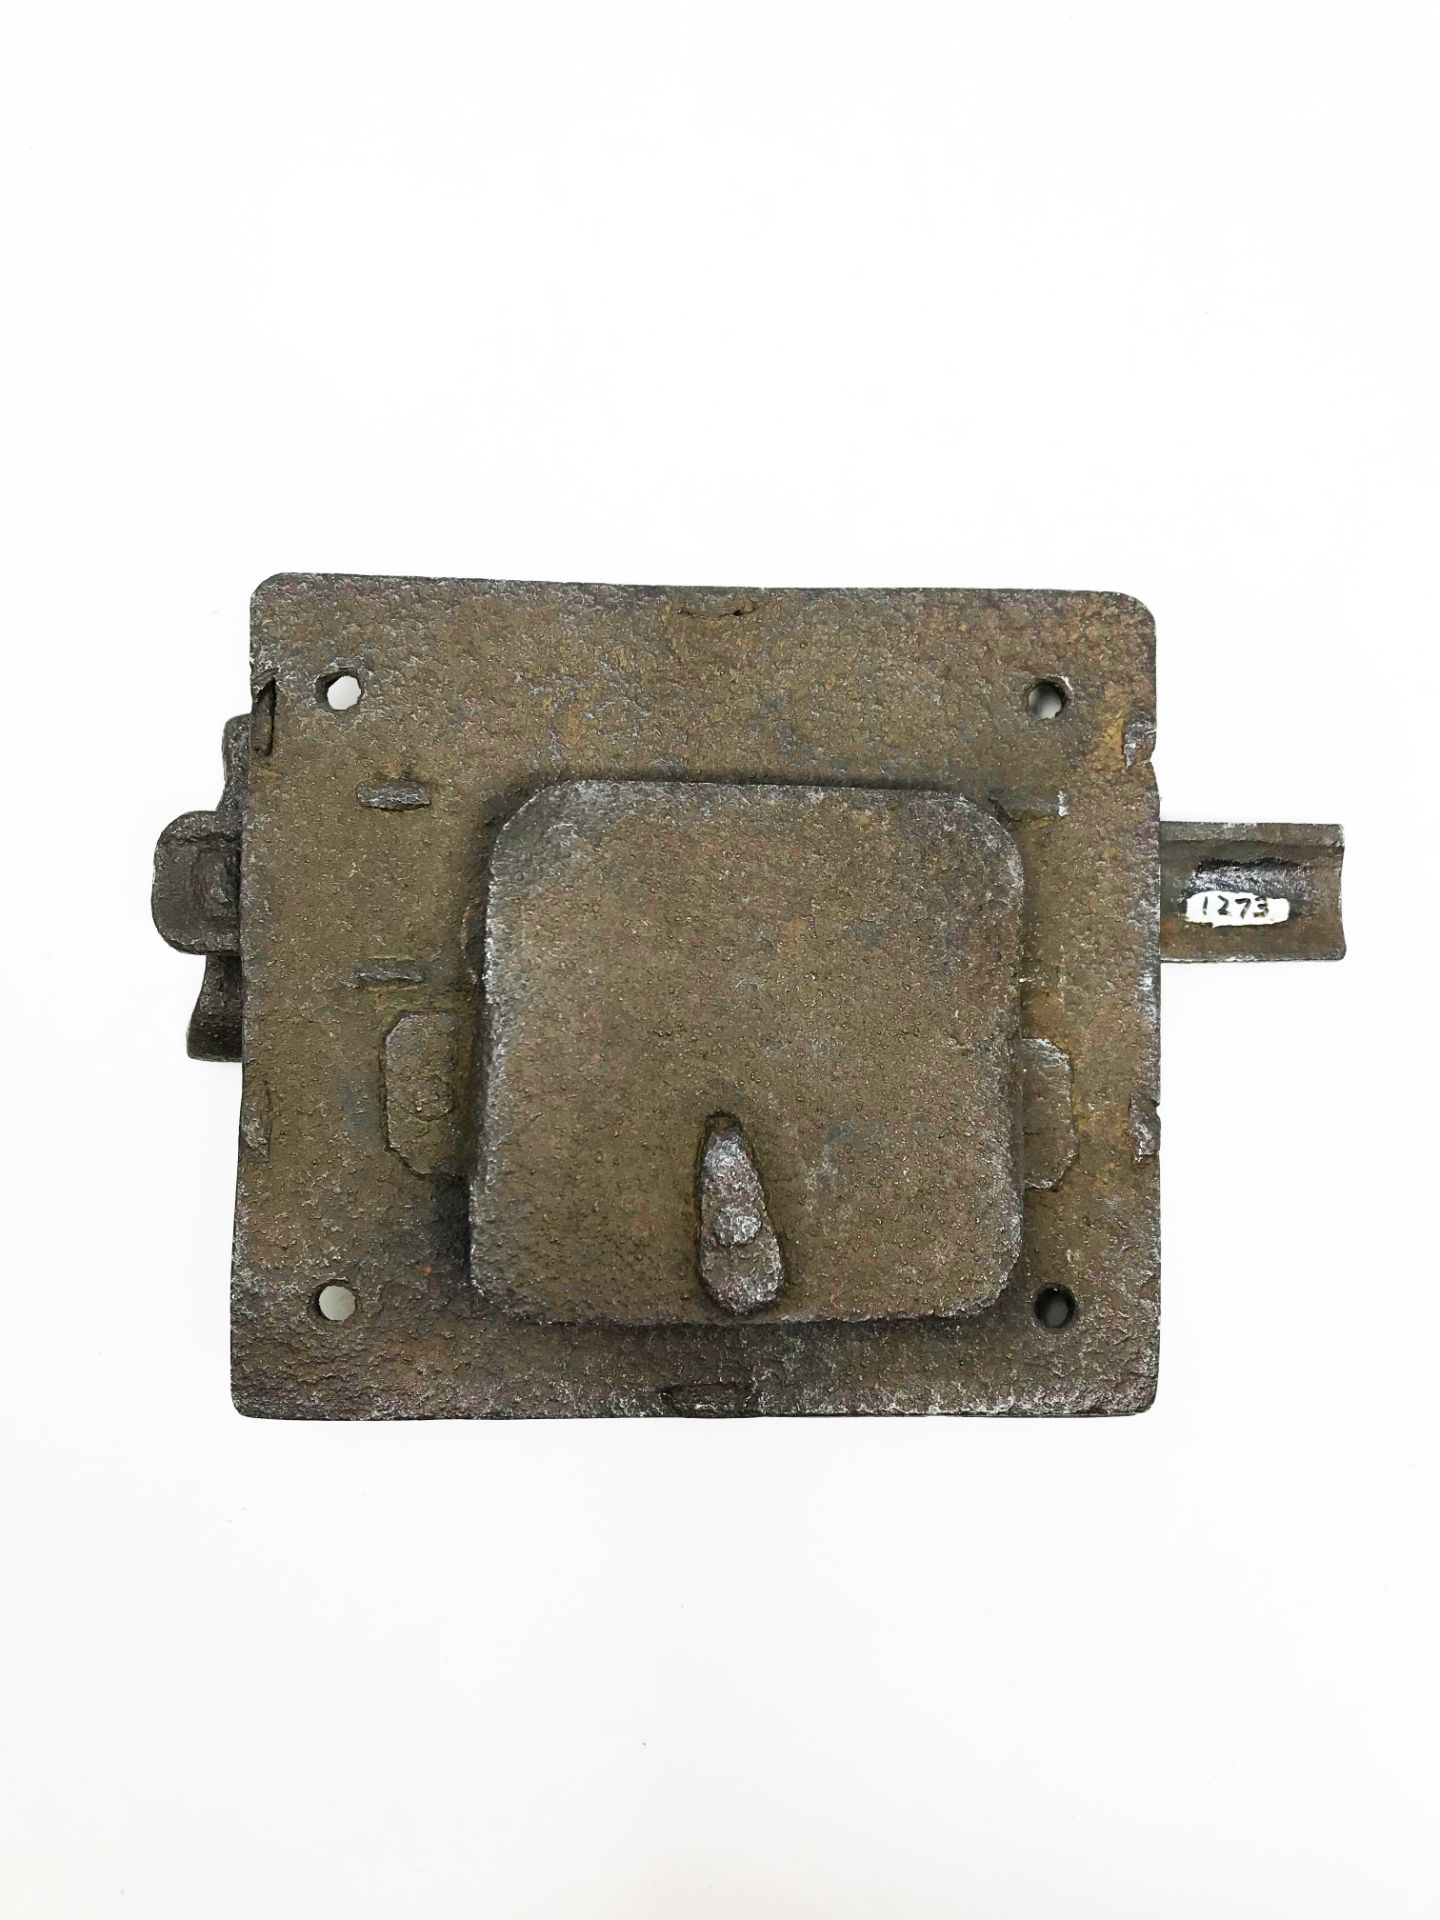 Medieval lock, the plate pierced with thistles, twisted frame, pierced bolt guide, knob formed by - Image 2 of 2